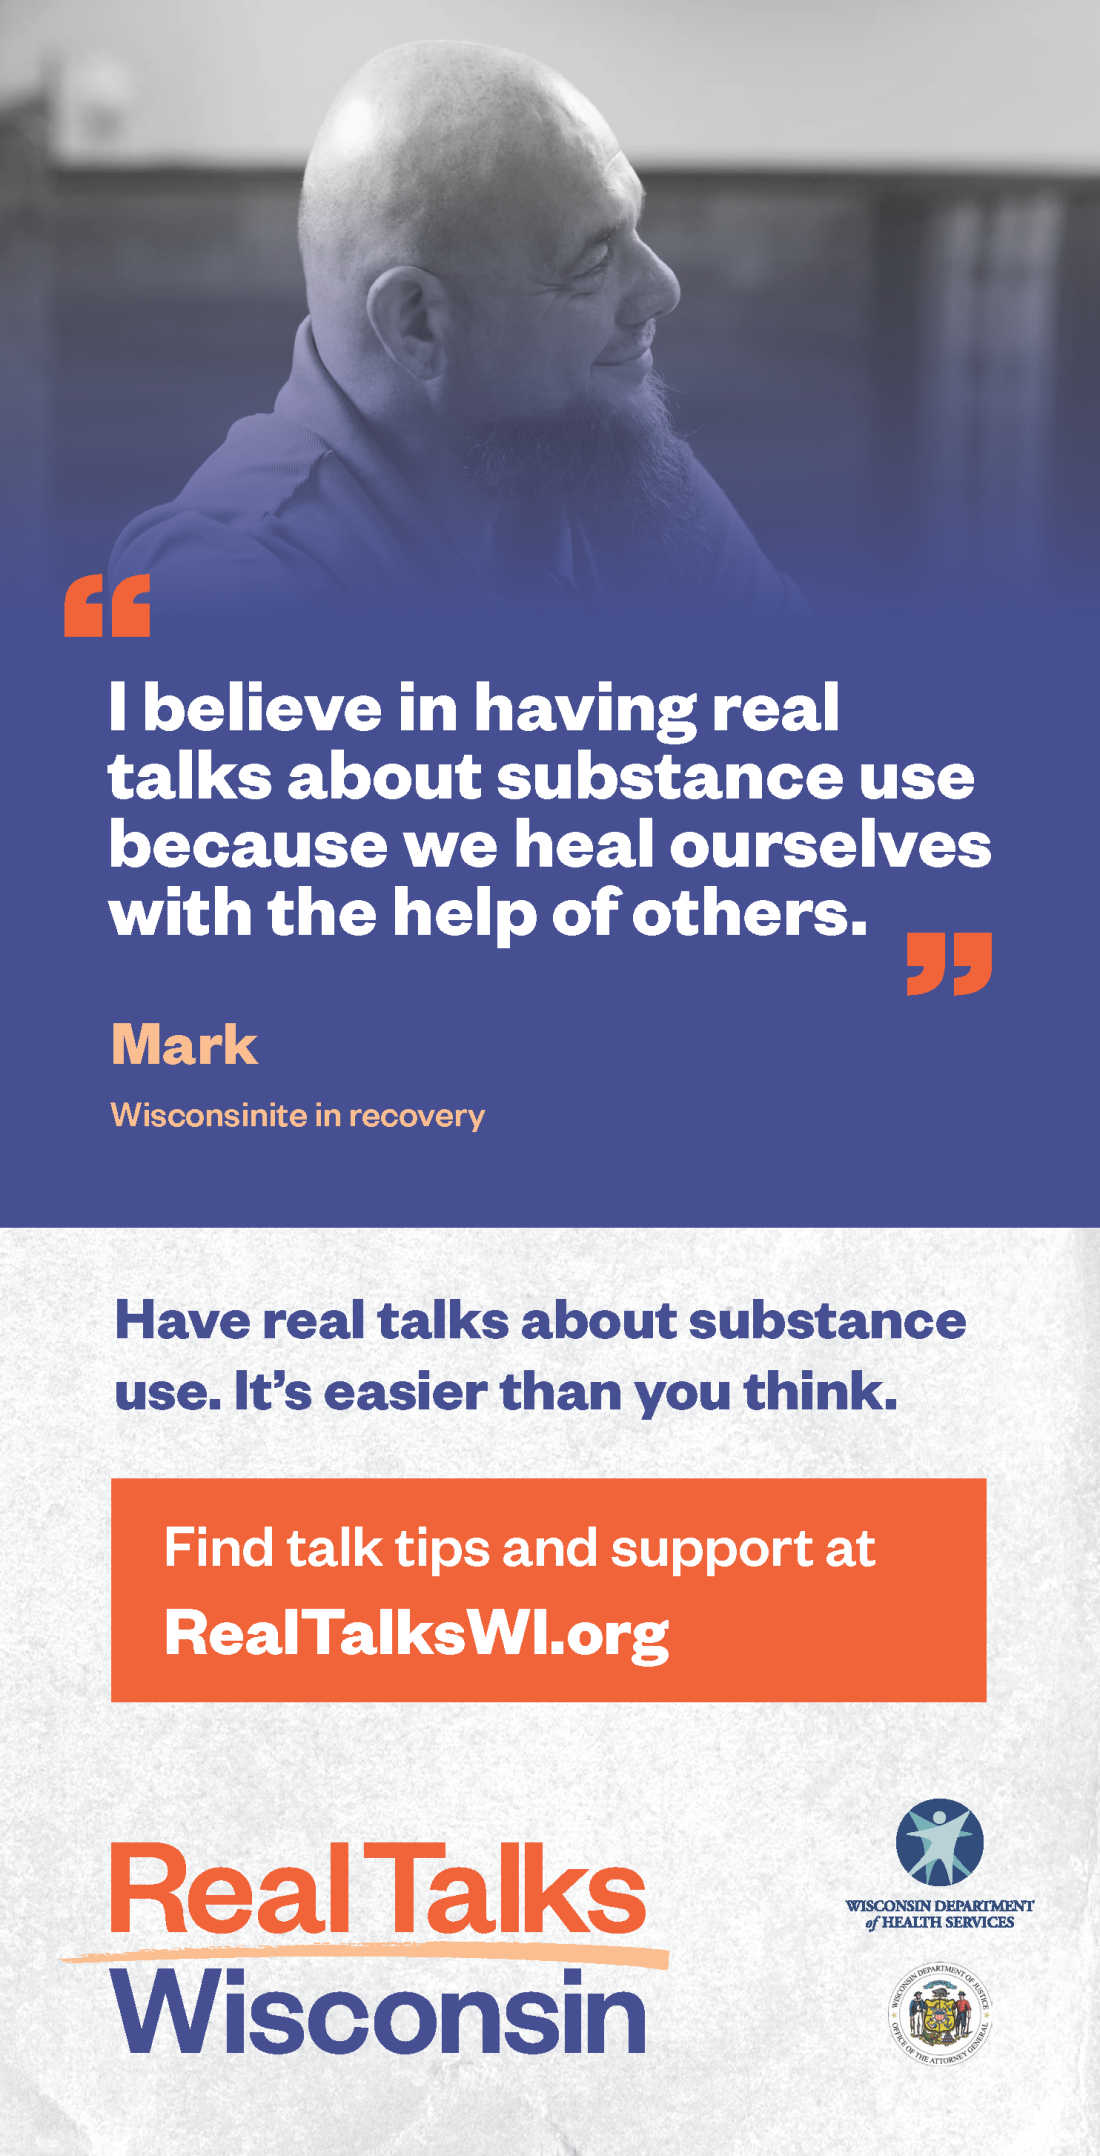 "I believe in having real talks about substance use because we heal ourselves with the help of others."